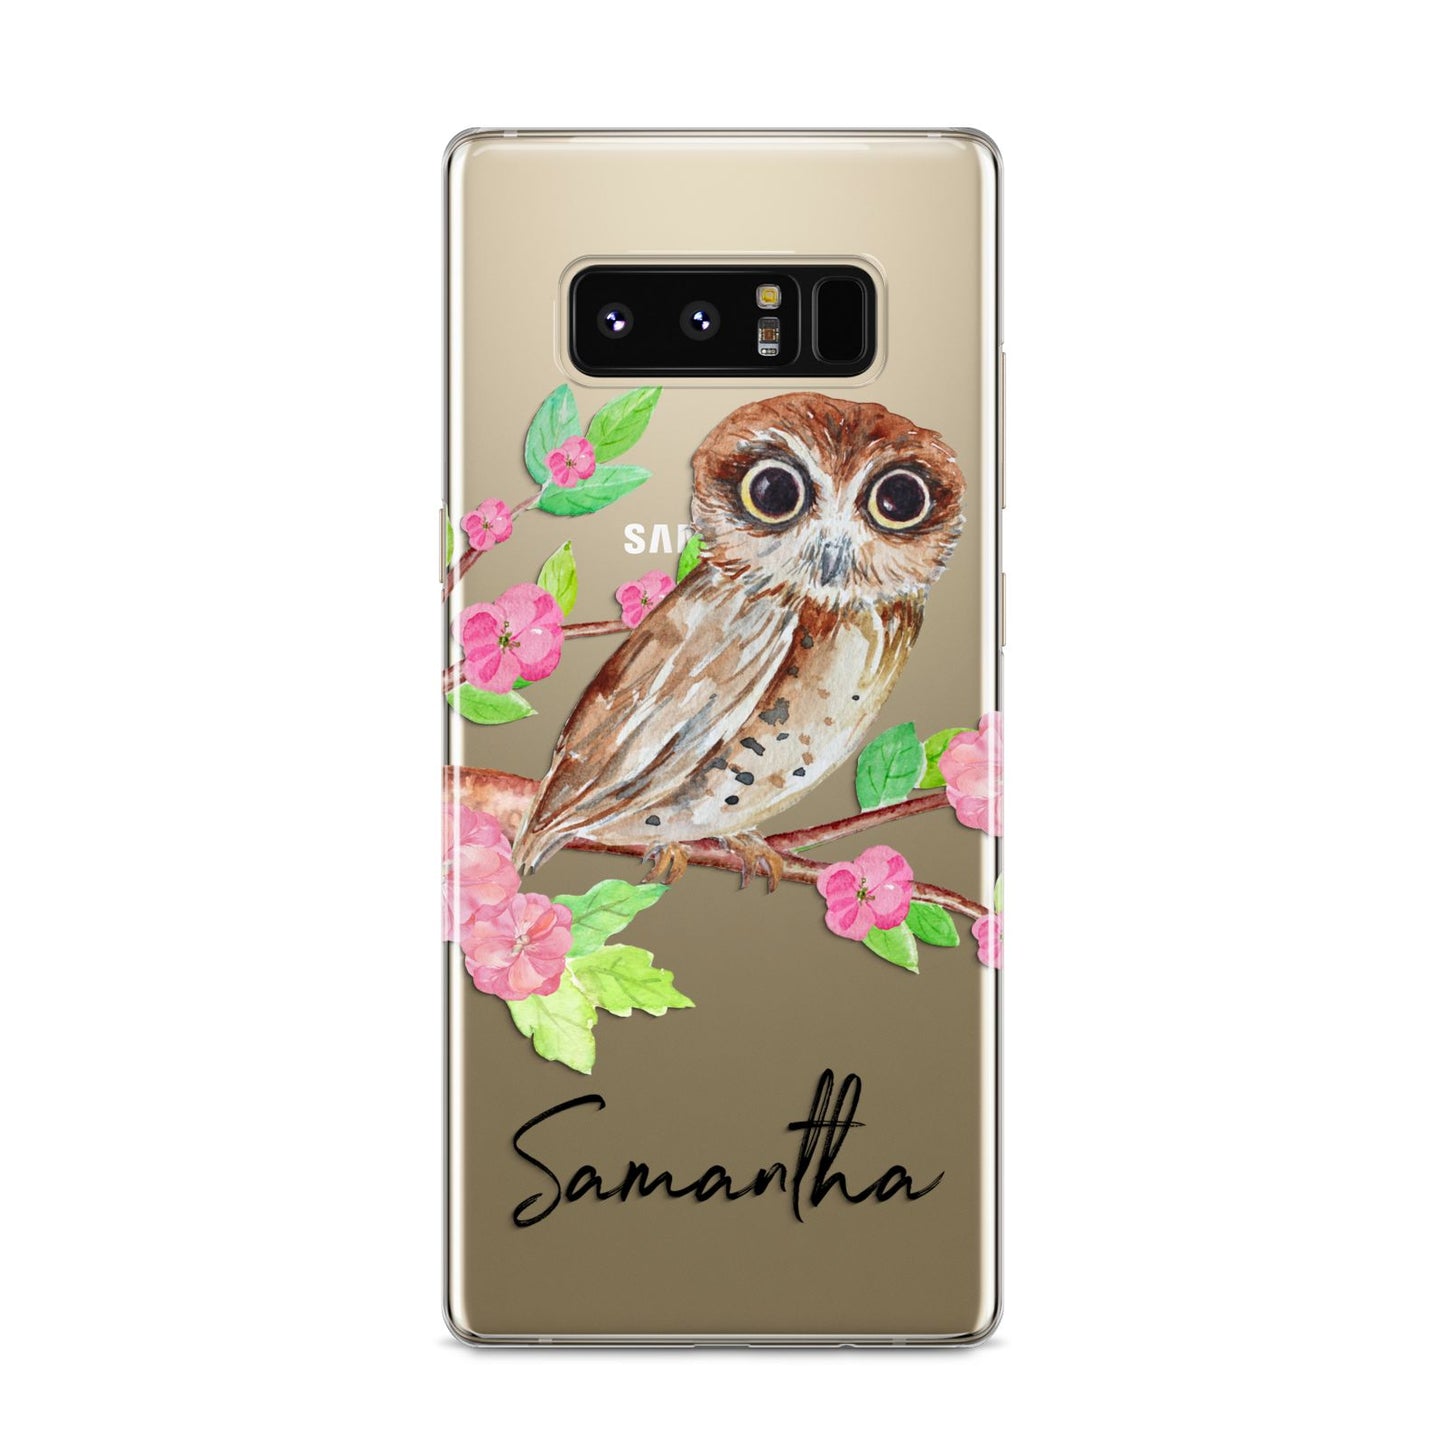 Personalised Owl Samsung Galaxy S8 Case